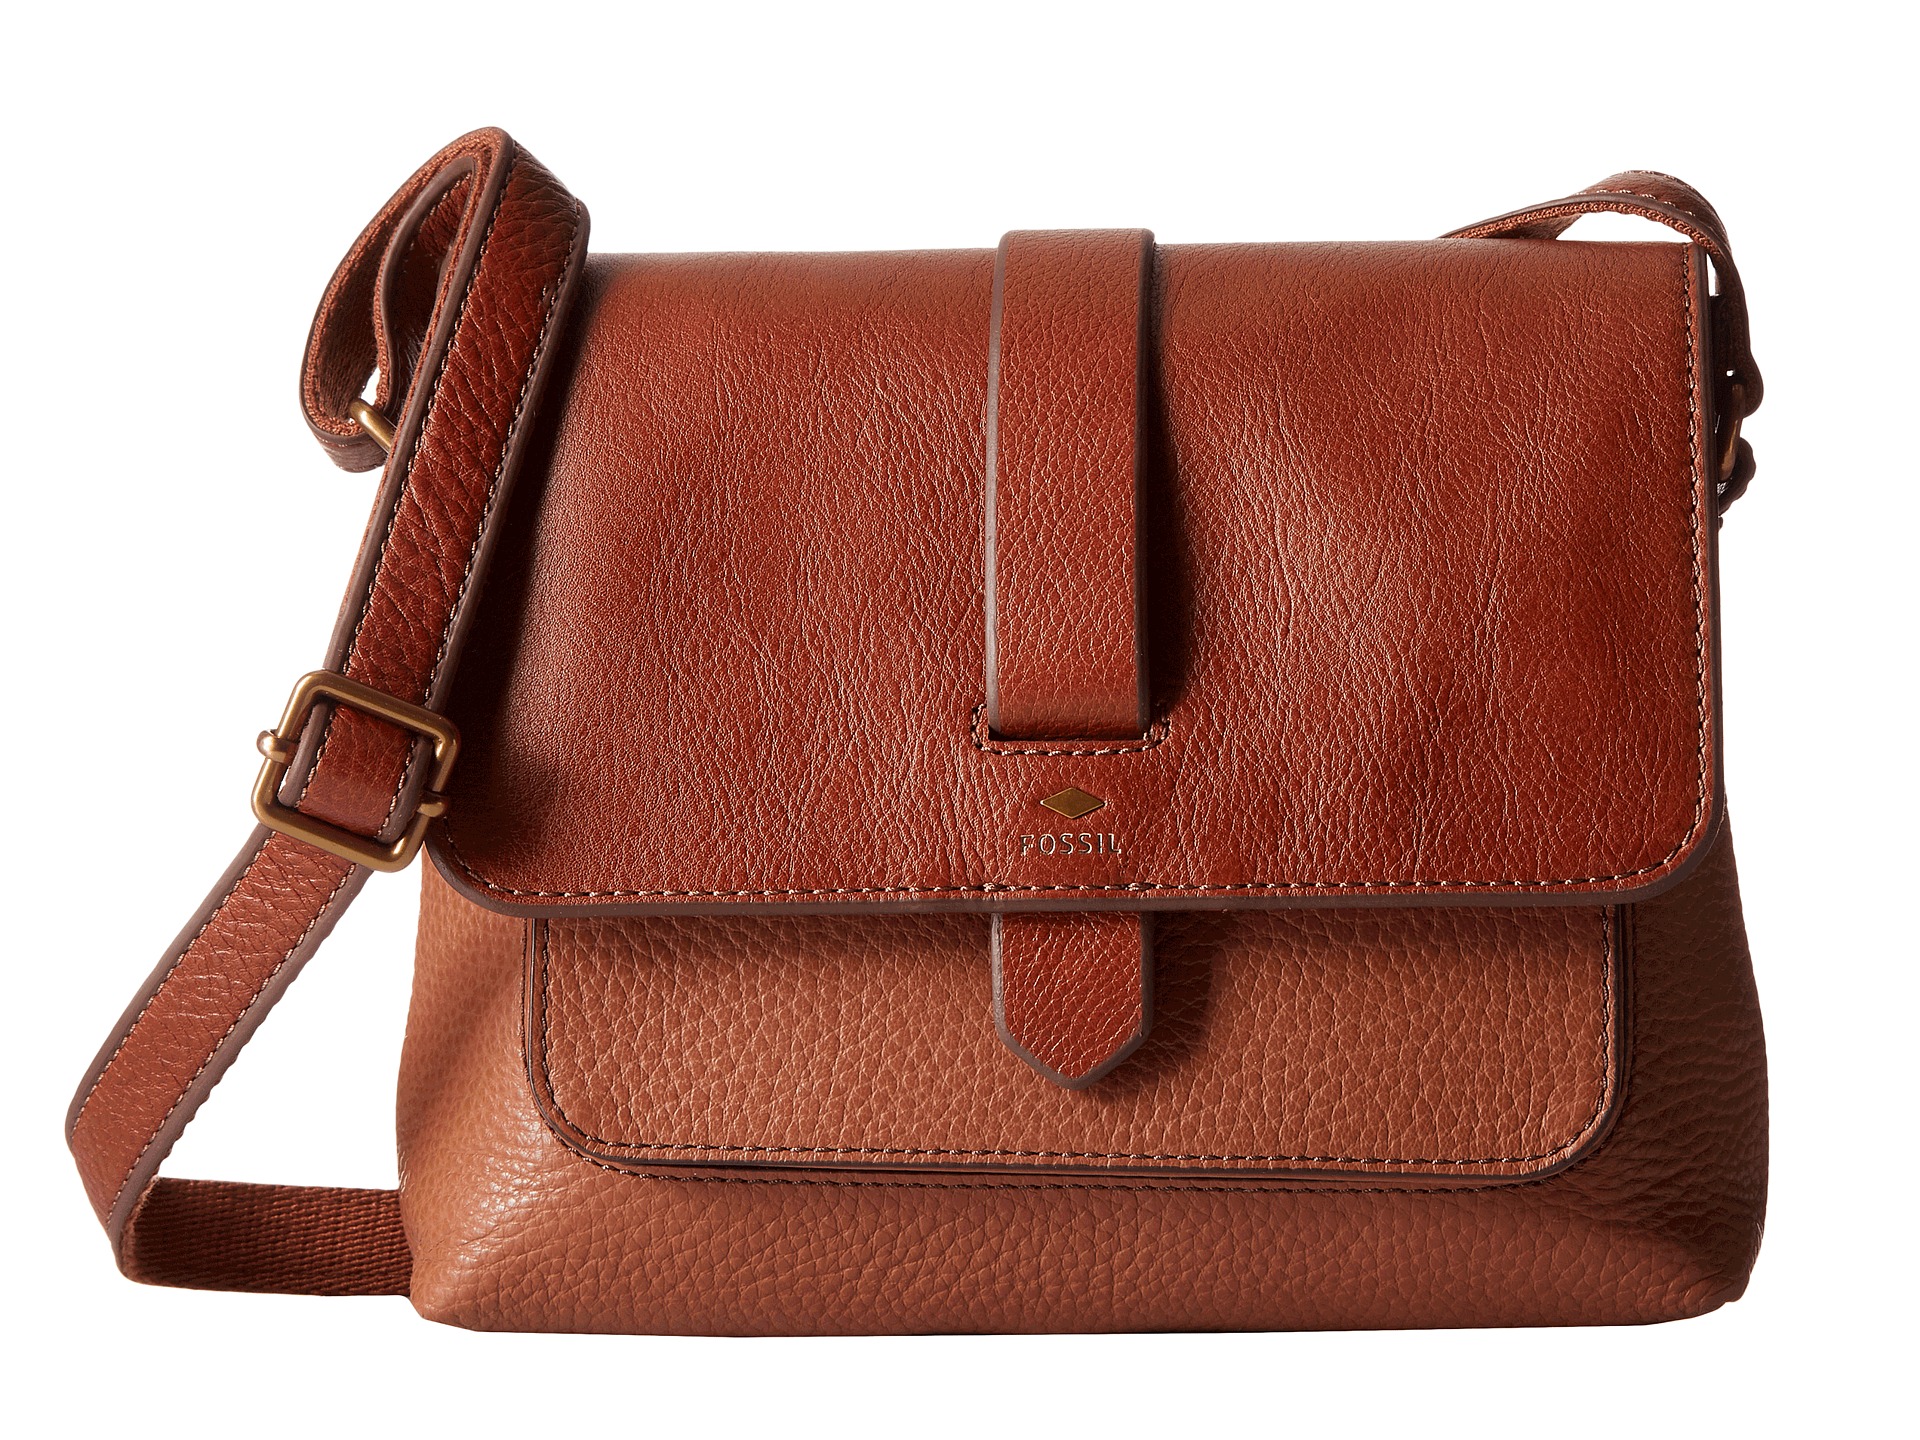 Fossil Kinley Small Crossbody at Zappos.com